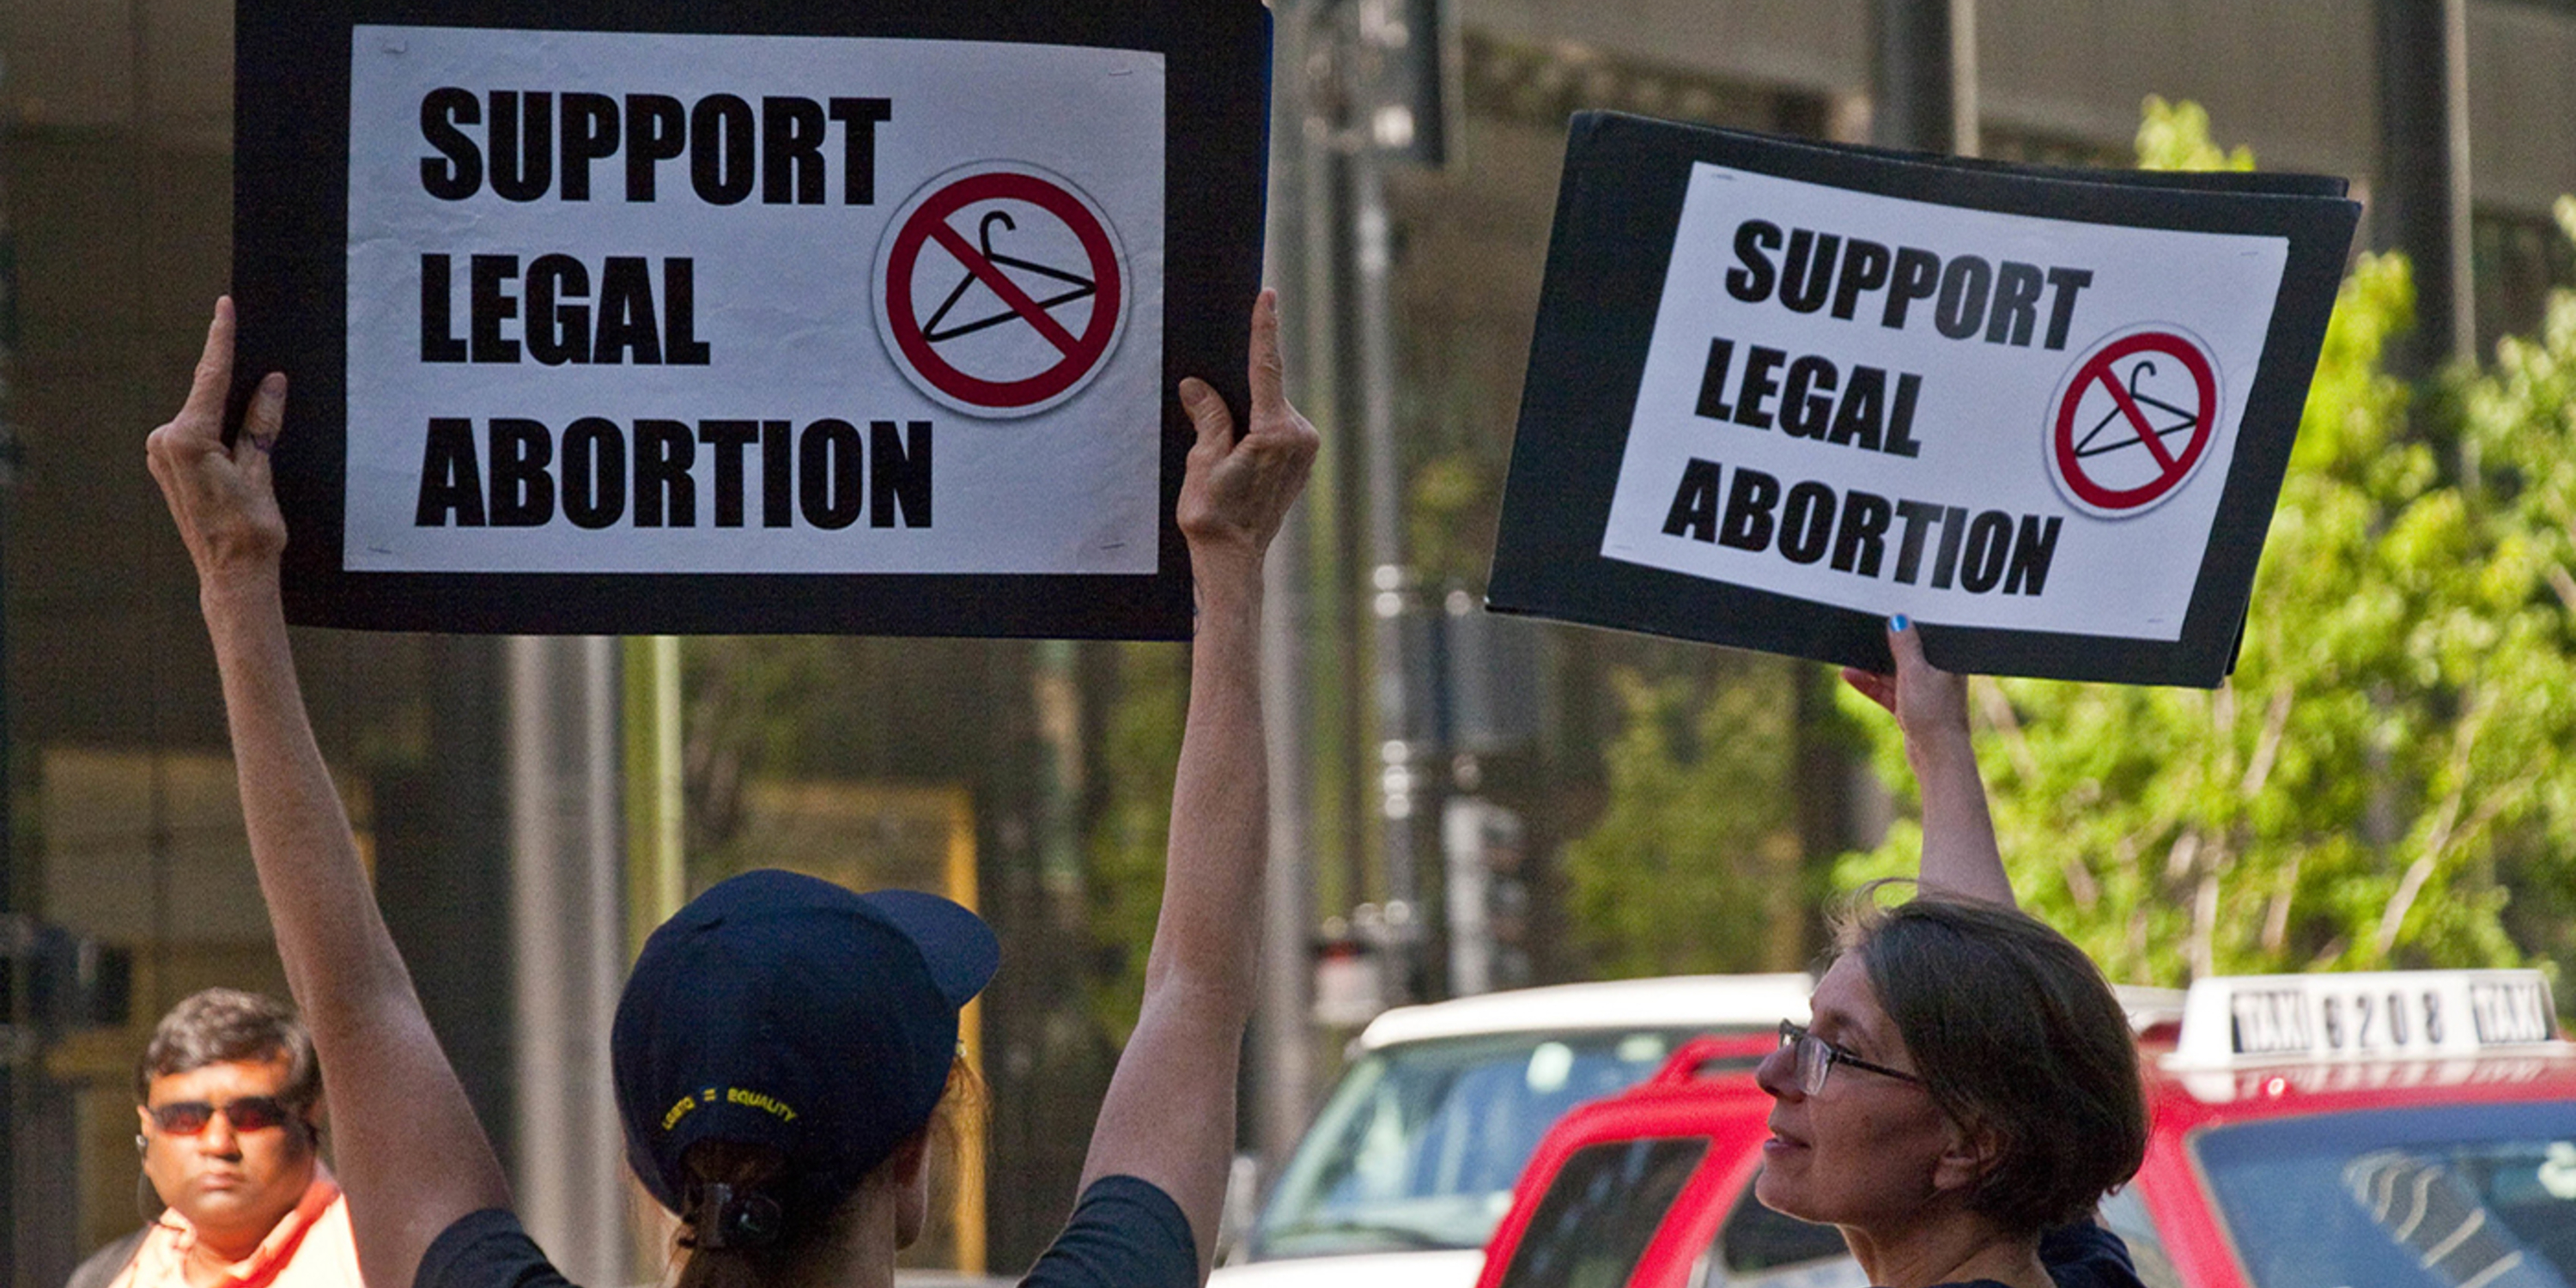 Pro-Choice demonstrators holding signs saying "Support Legal Abortion"